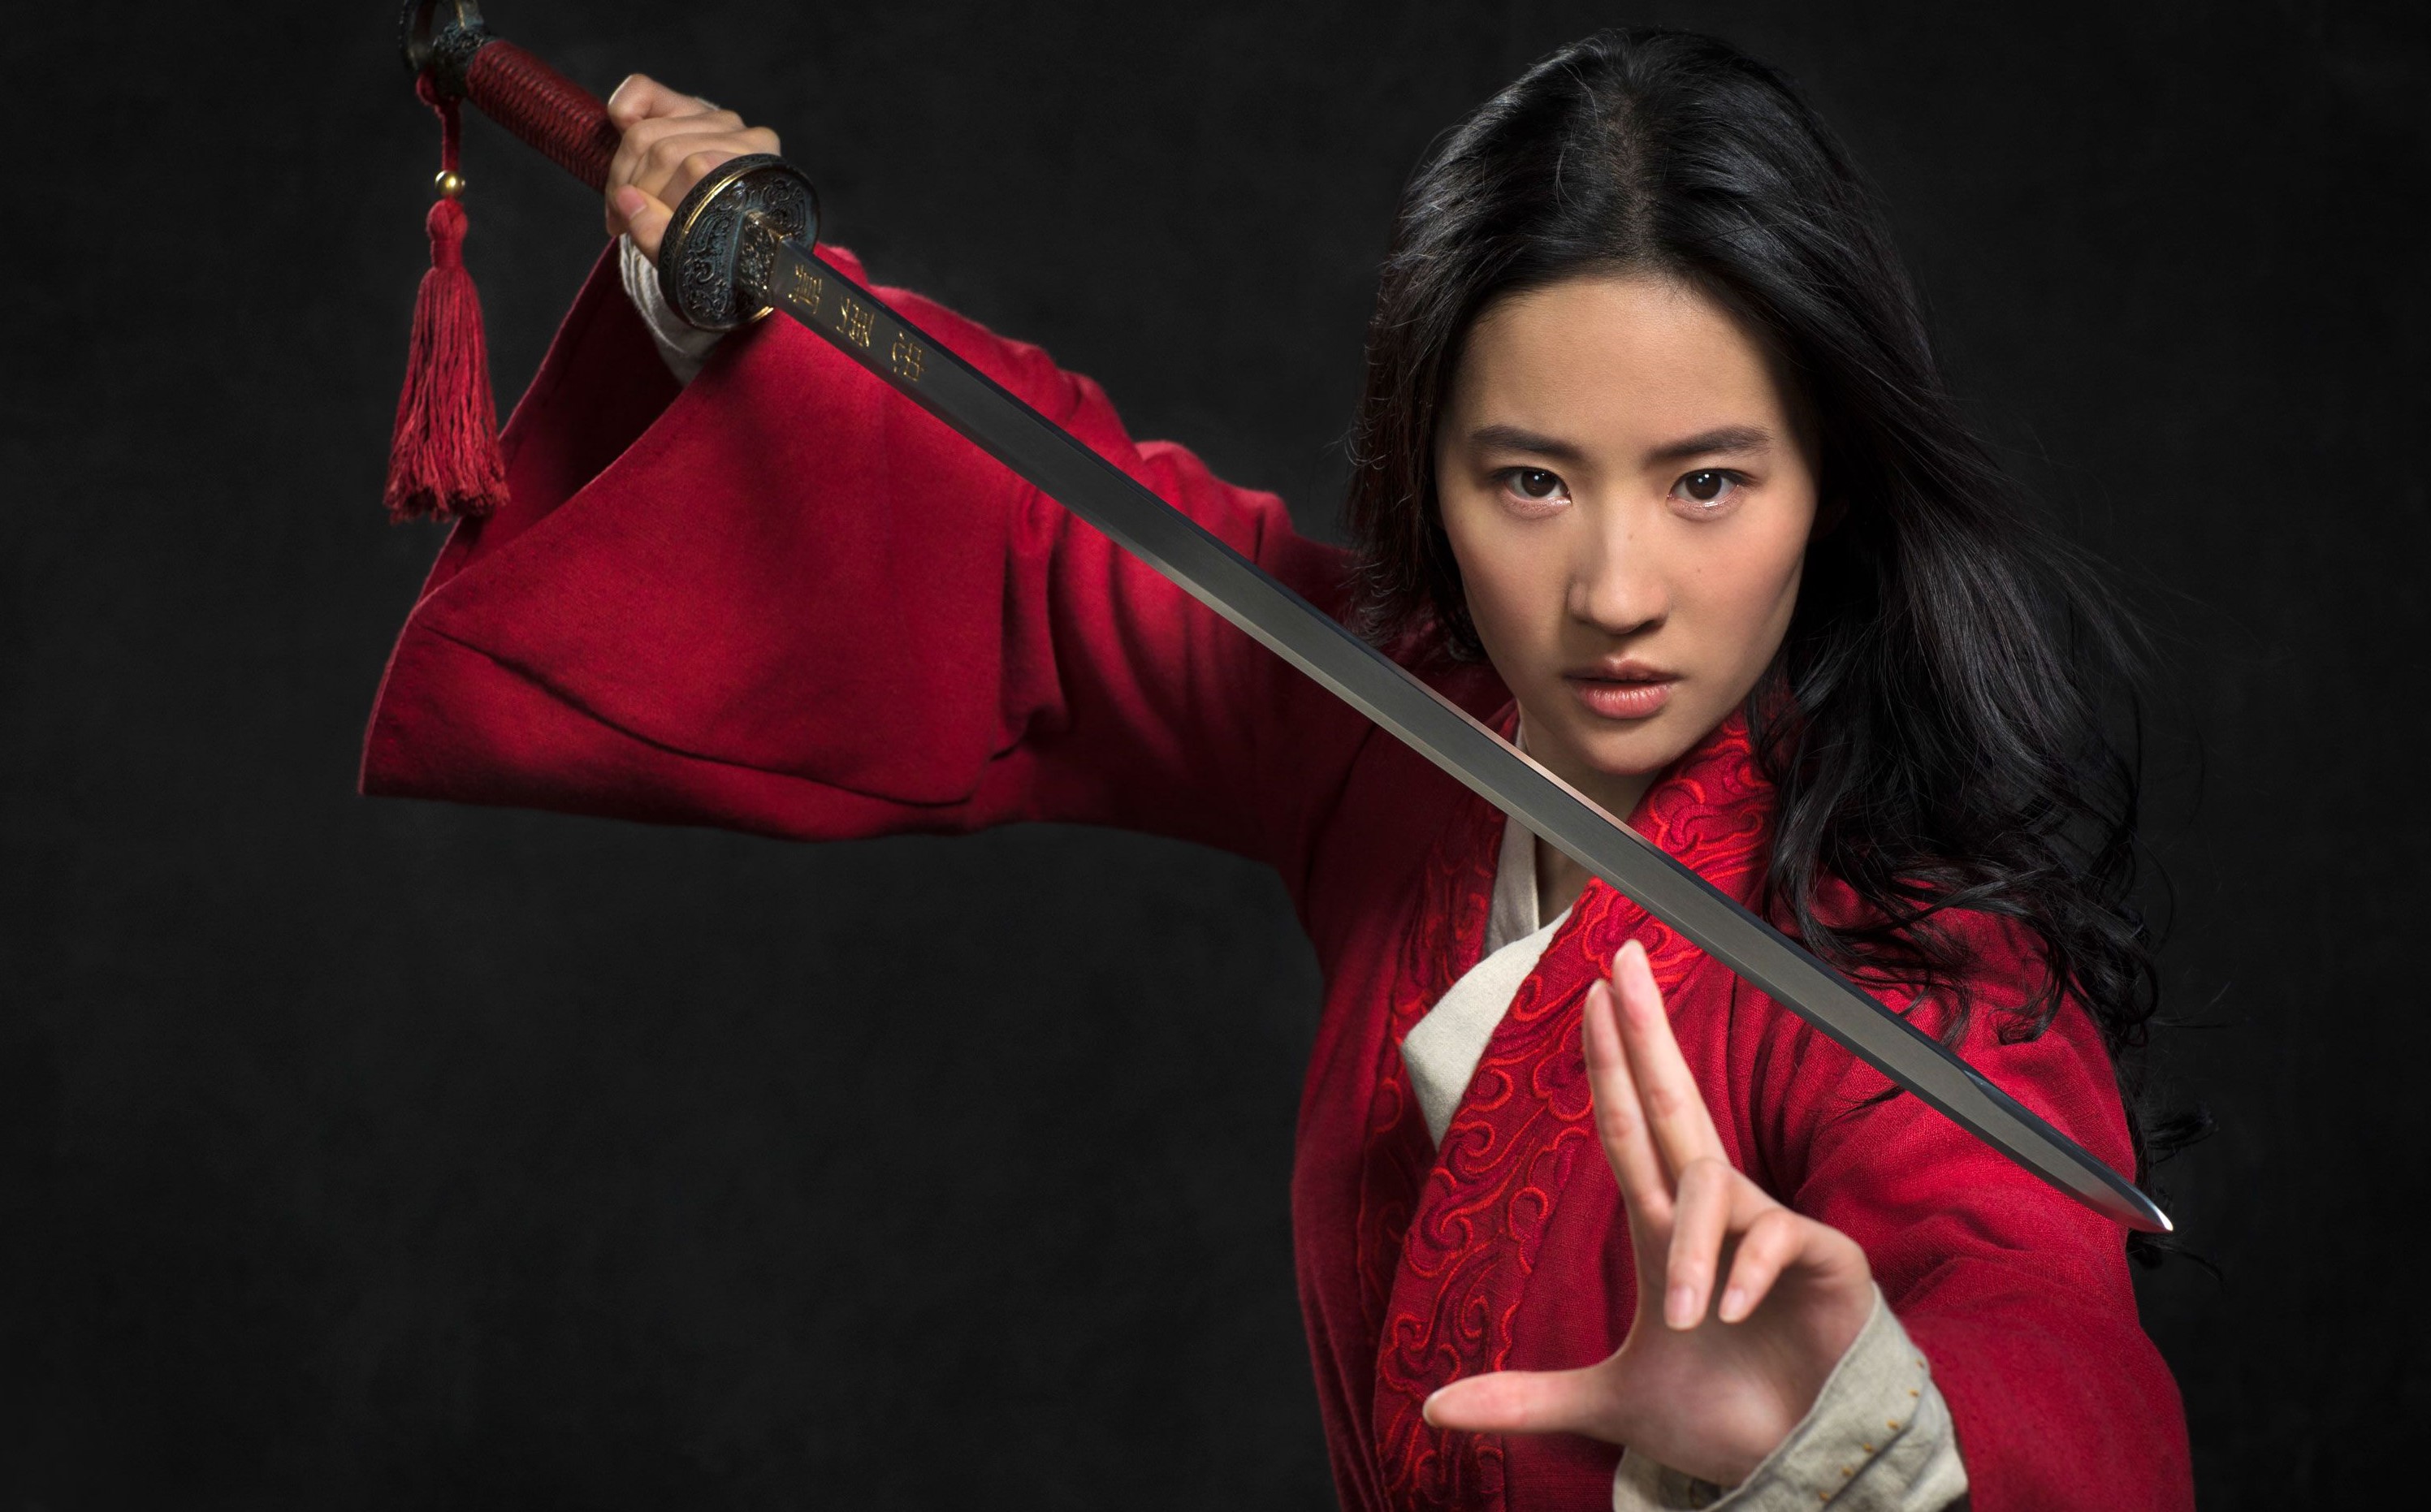 Disney aims to win over China with Mulan